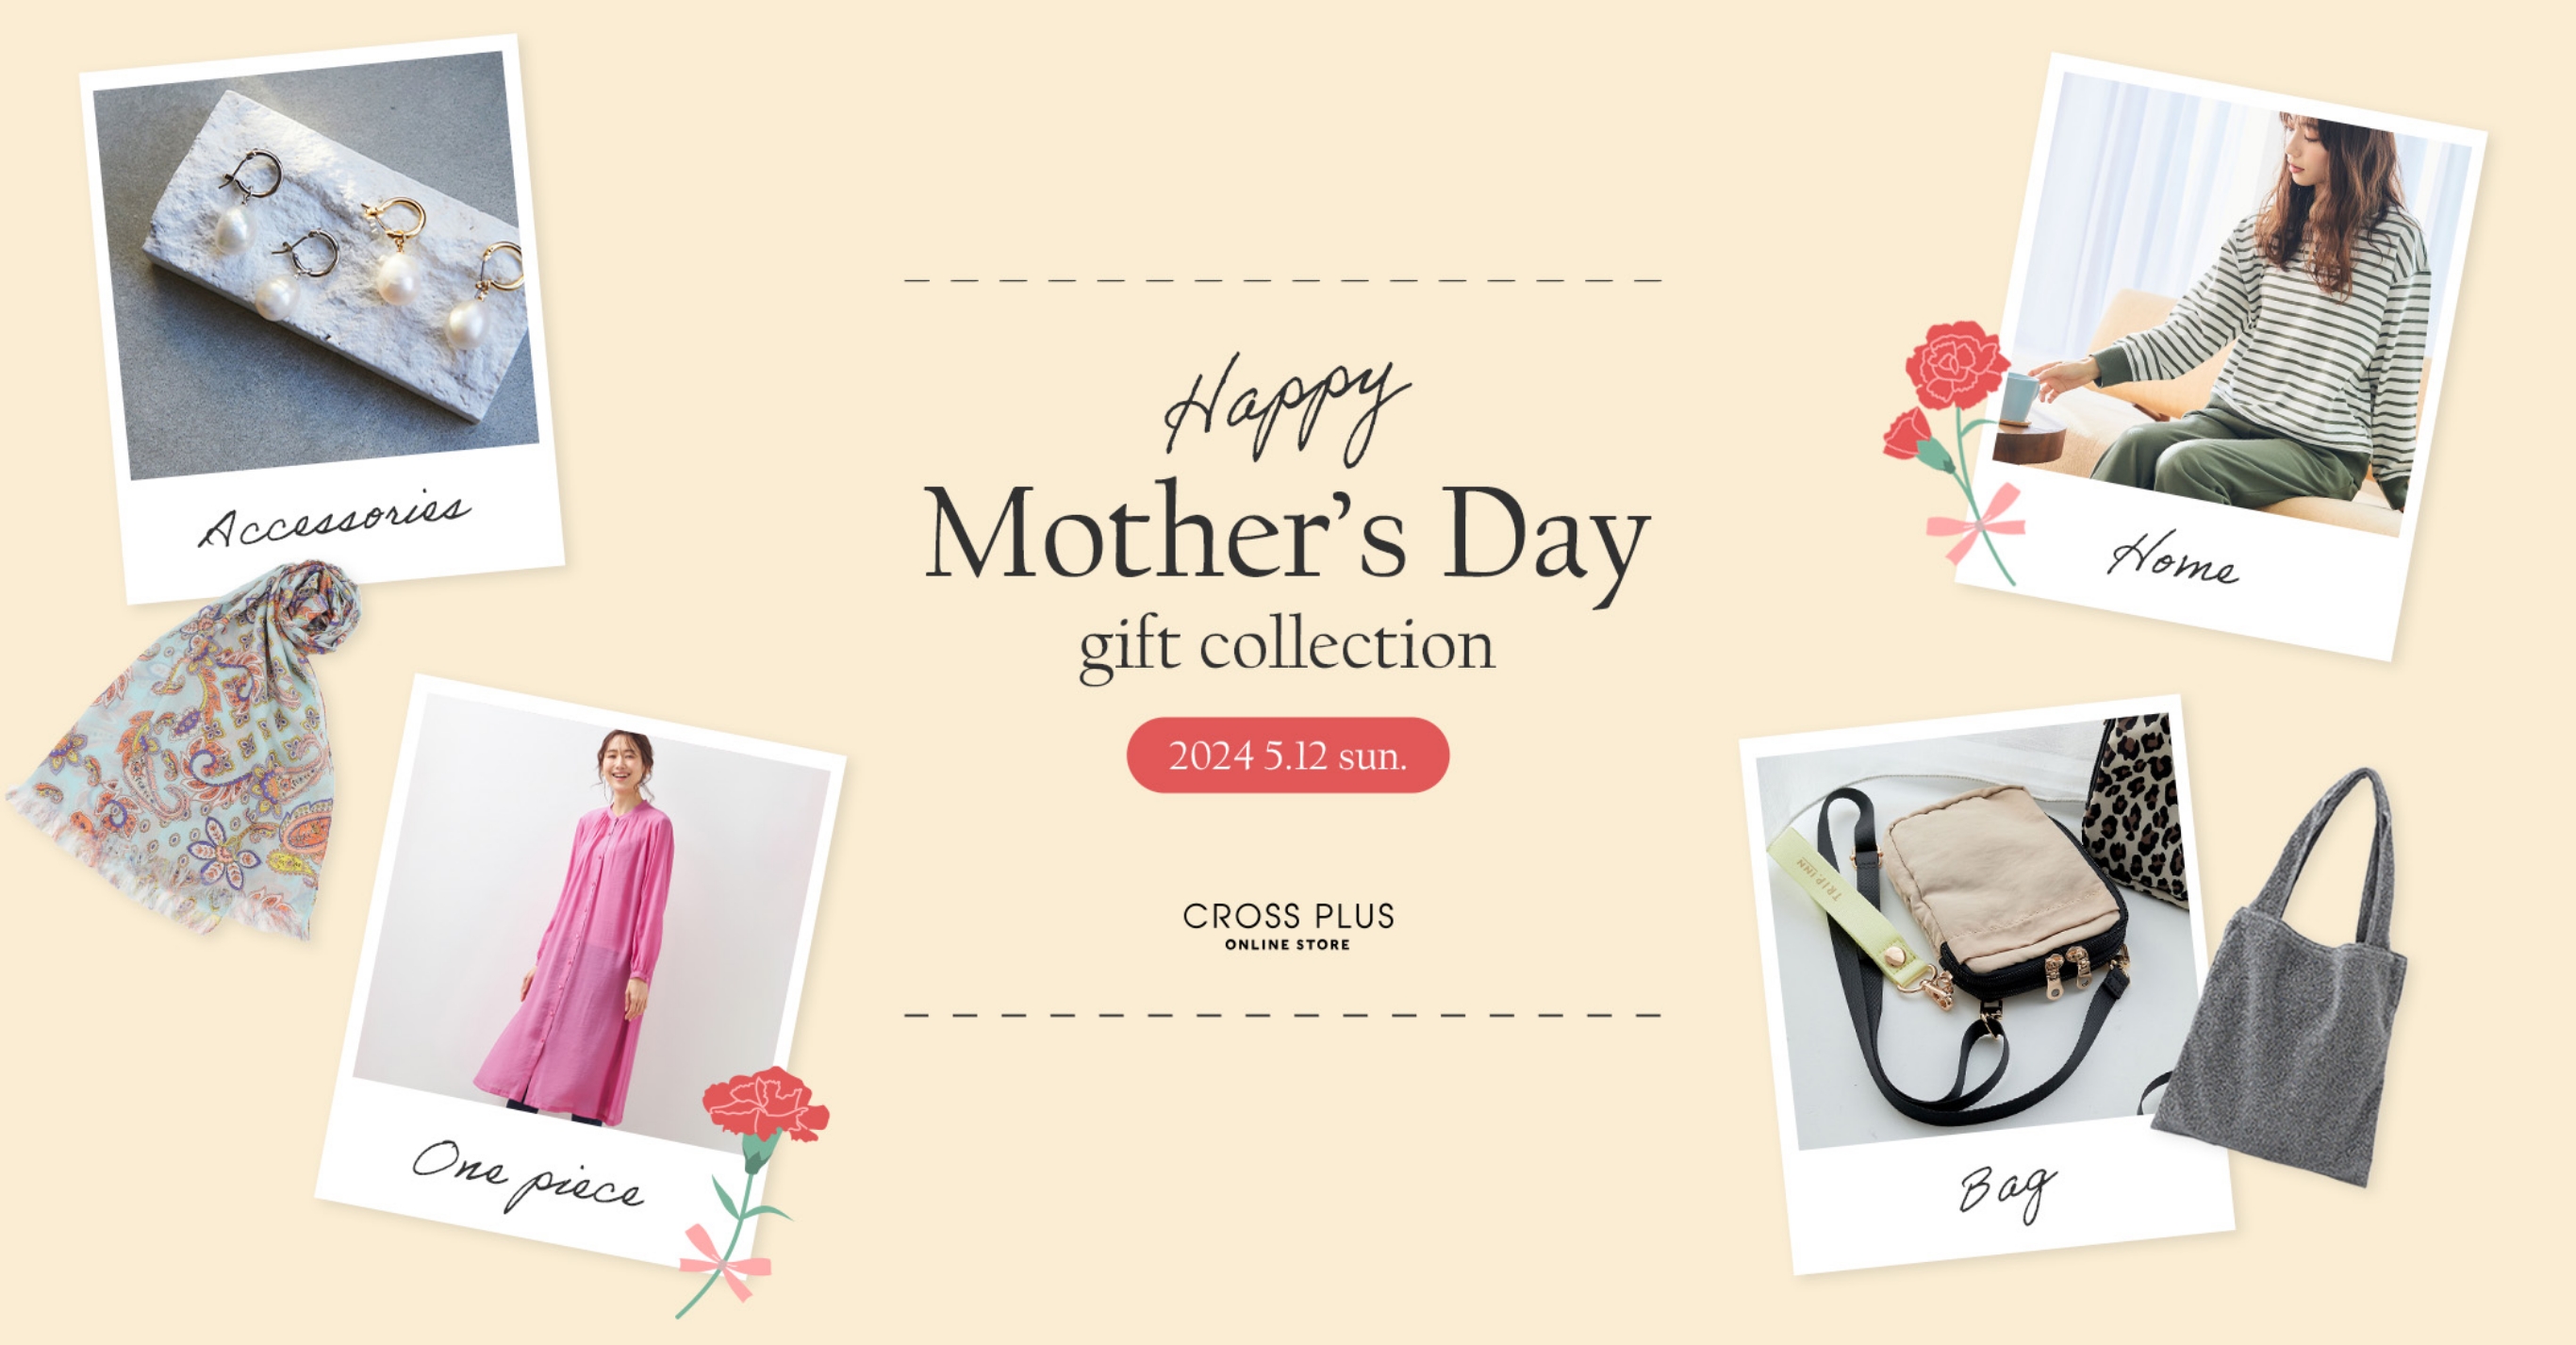 Happy Mother’s Day gift collection